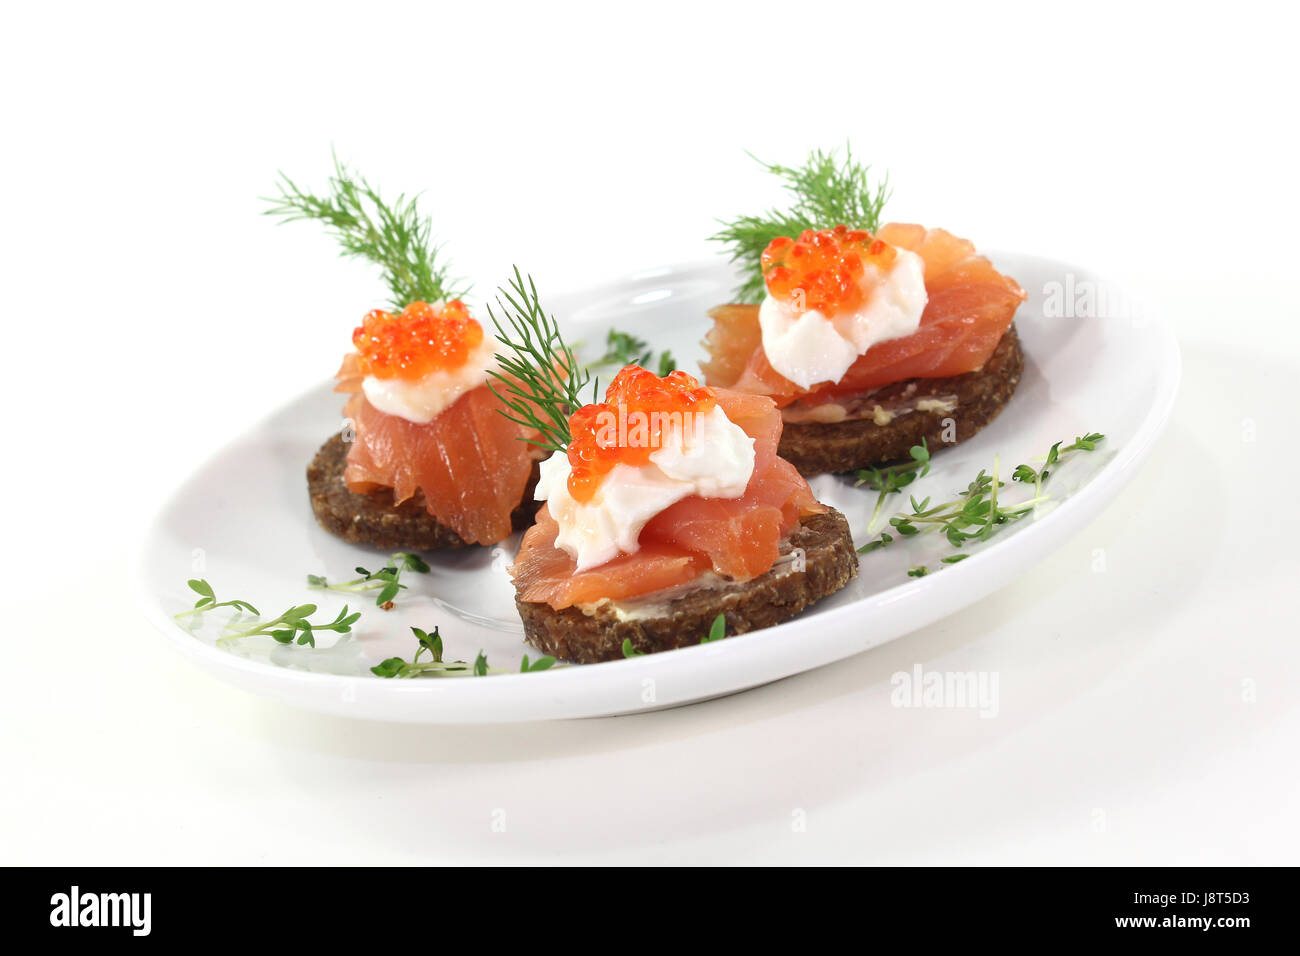 hors d oeuvre Stock Photo